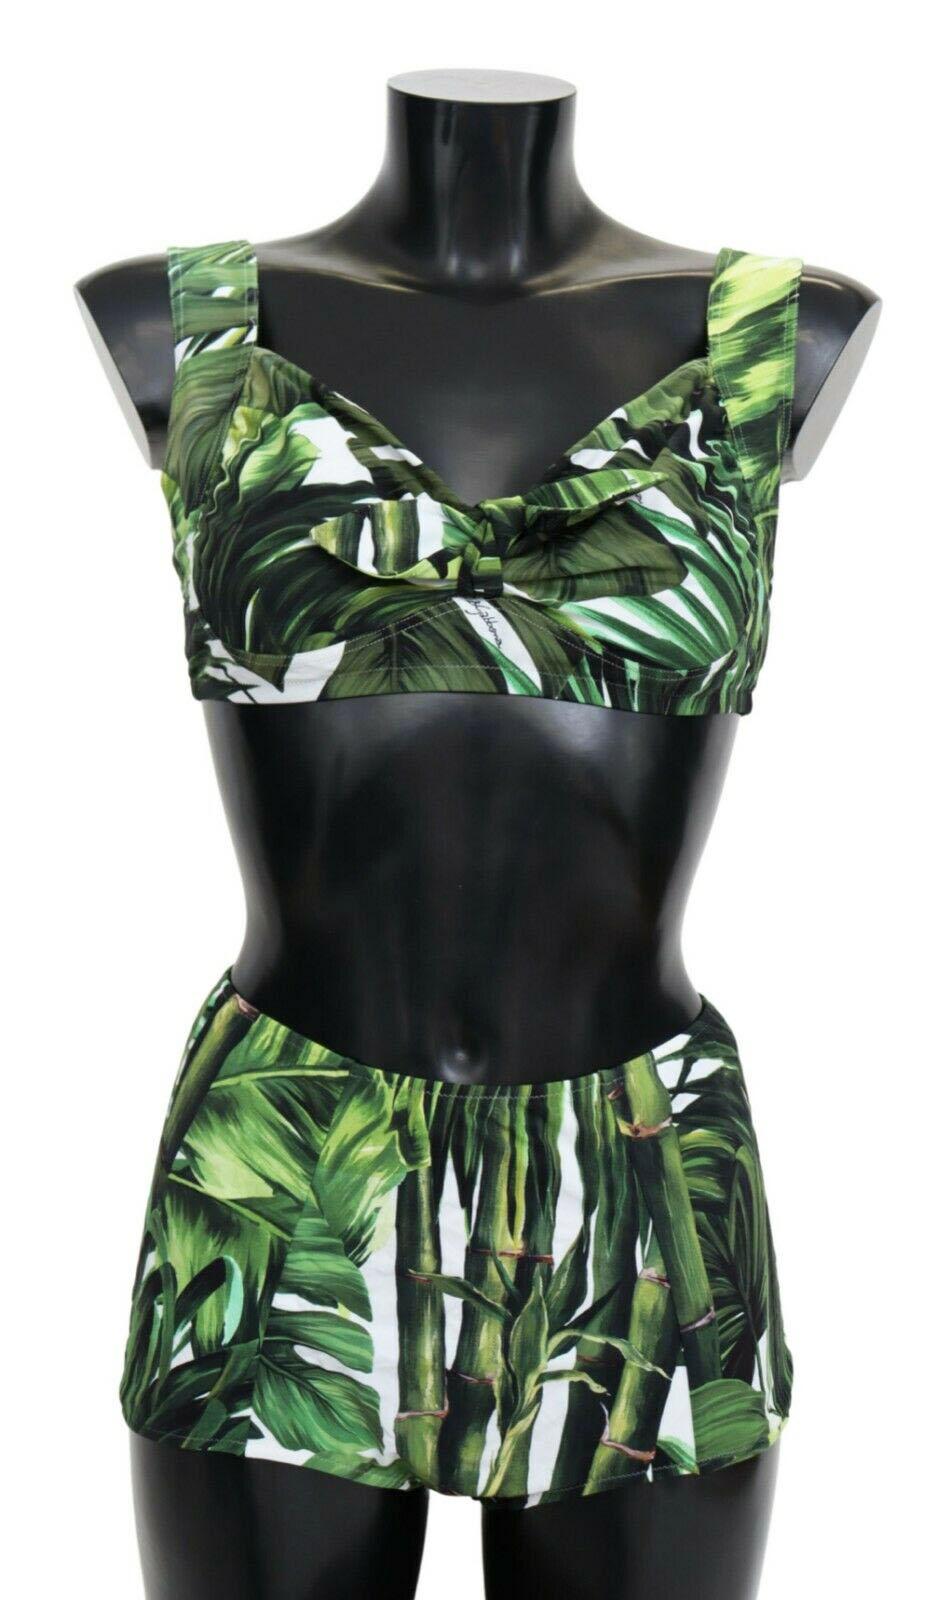 Gorgeous brand new with tags, 100% Authentic Dolce & Gabbana two piece tropical jungle print hotpants swimsuit swimwear.


Color: Multicolor green 

Model: two piece set, top and bottom

Material: 75% Nylon 25% Elastane

Logo detailing

Made in